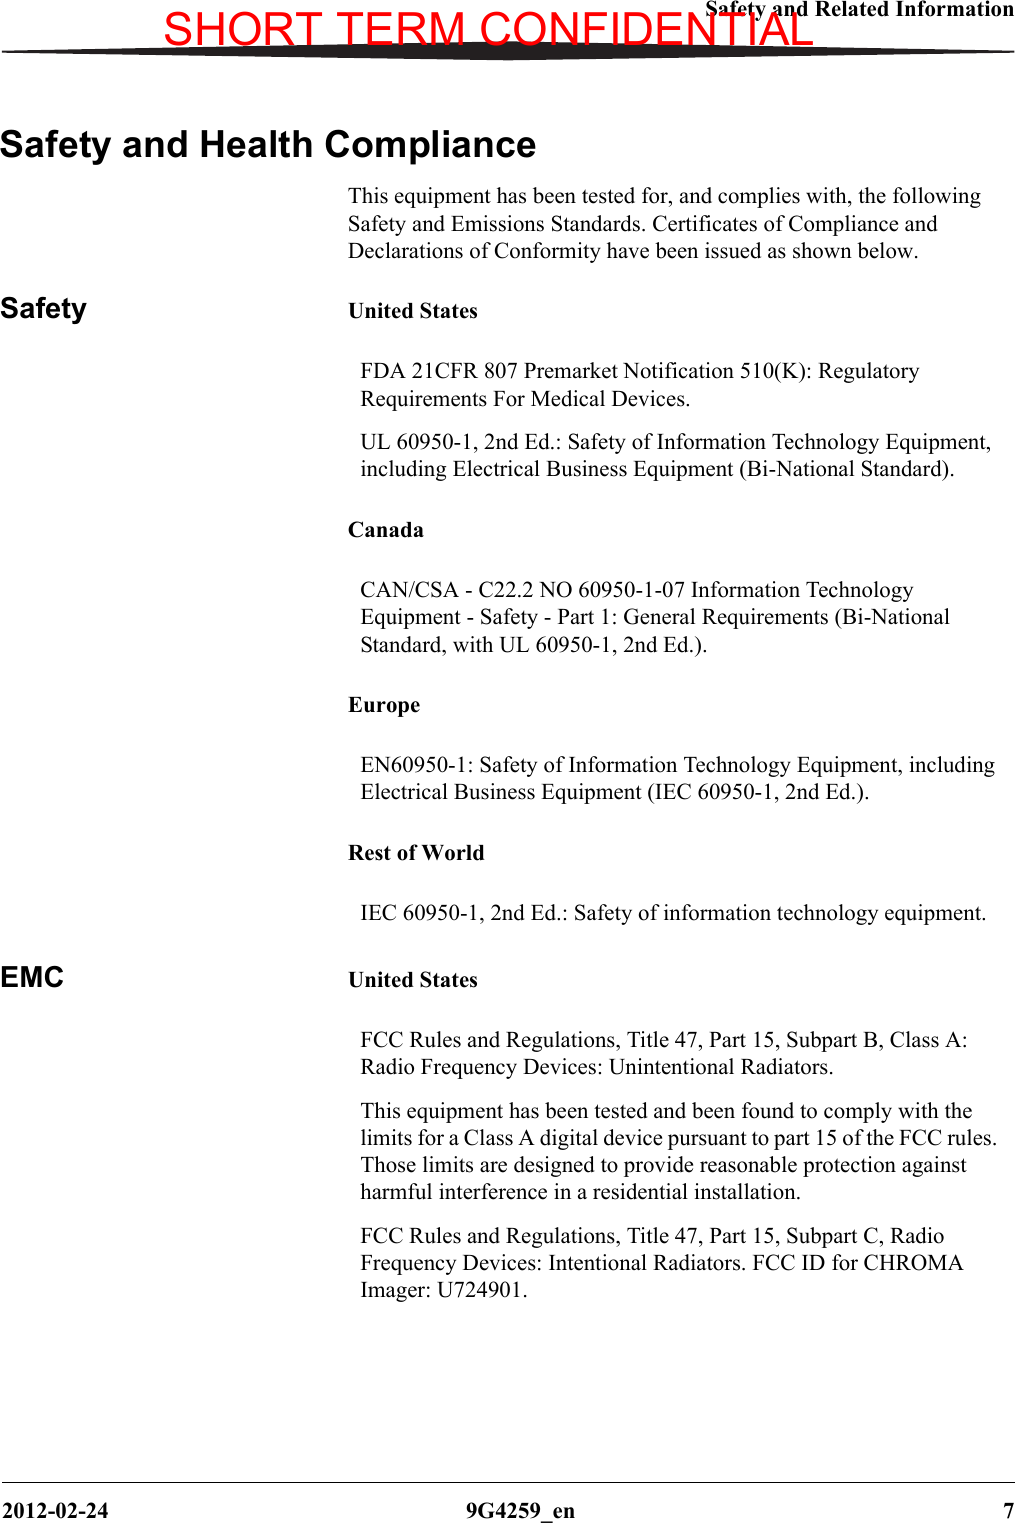 Safety and Related Information2012-02-24 9G4259_en 7Safety and Health ComplianceThis equipment has been tested for, and complies with, the following Safety and Emissions Standards. Certificates of Compliance and Declarations of Conformity have been issued as shown below.Safety United StatesCanadaEuropeRest of WorldEMC United StatesFDA 21CFR 807 Premarket Notification 510(K): Regulatory Requirements For Medical Devices.UL 60950-1, 2nd Ed.: Safety of Information Technology Equipment, including Electrical Business Equipment (Bi-National Standard).CAN/CSA - C22.2 NO 60950-1-07 Information Technology Equipment - Safety - Part 1: General Requirements (Bi-National Standard, with UL 60950-1, 2nd Ed.).EN60950-1: Safety of Information Technology Equipment, including Electrical Business Equipment (IEC 60950-1, 2nd Ed.).IEC 60950-1, 2nd Ed.: Safety of information technology equipment.FCC Rules and Regulations, Title 47, Part 15, Subpart B, Class A: Radio Frequency Devices: Unintentional Radiators.This equipment has been tested and been found to comply with the limits for a Class A digital device pursuant to part 15 of the FCC rules. Those limits are designed to provide reasonable protection against harmful interference in a residential installation.FCC Rules and Regulations, Title 47, Part 15, Subpart C, Radio Frequency Devices: Intentional Radiators. FCC ID for CHROMA Imager: U724901.SHORT TERM CONFIDENTIAL